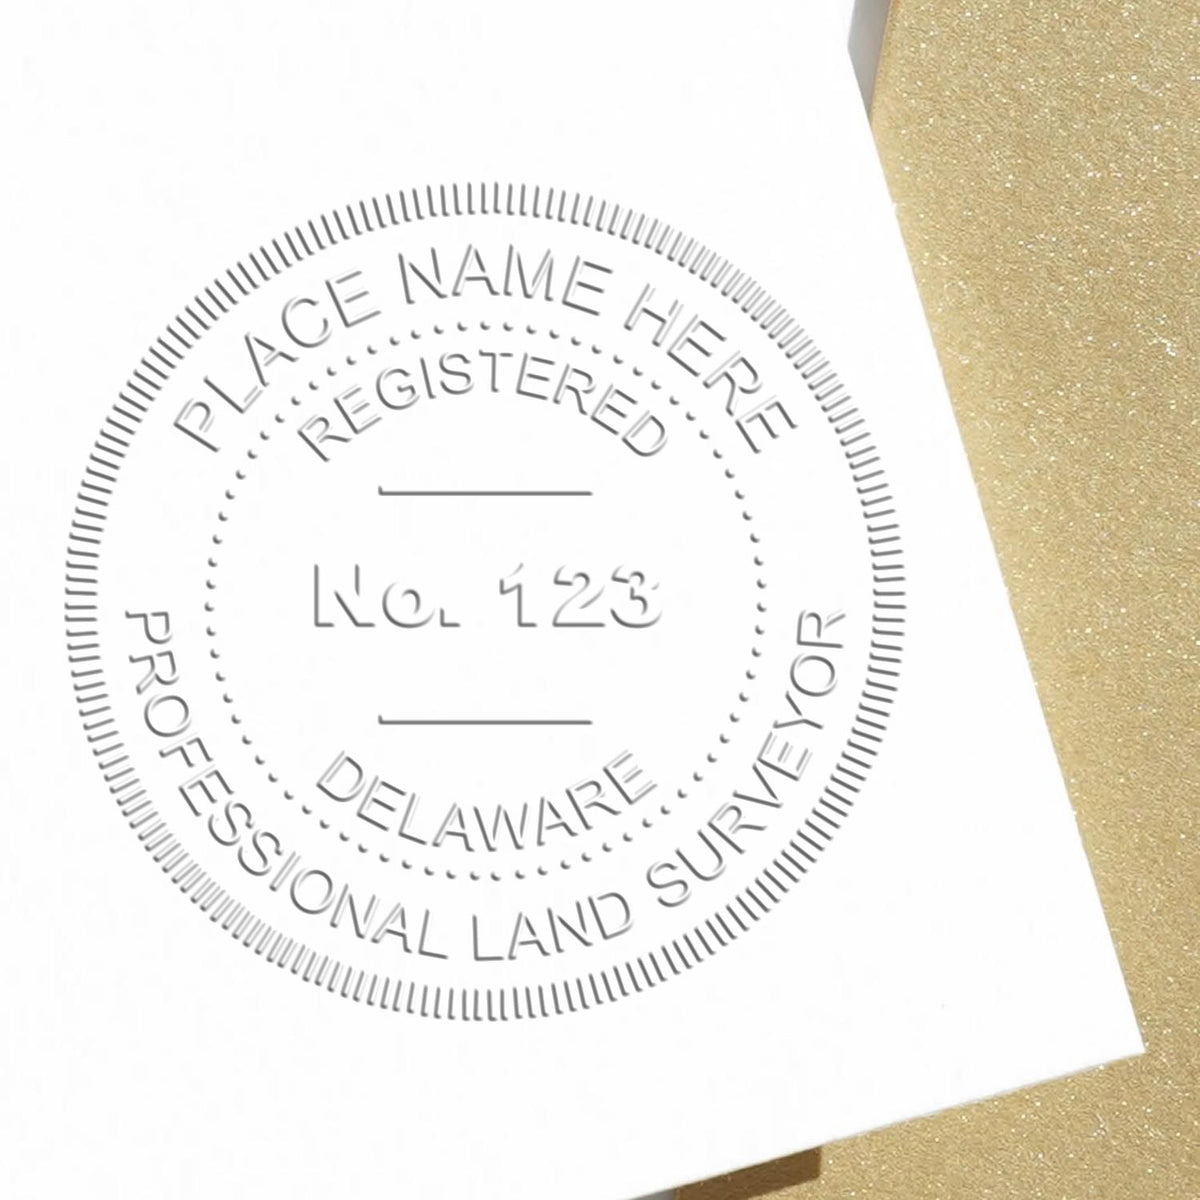 An in use photo of the Hybrid Delaware Land Surveyor Seal showing a sample imprint on a cardstock